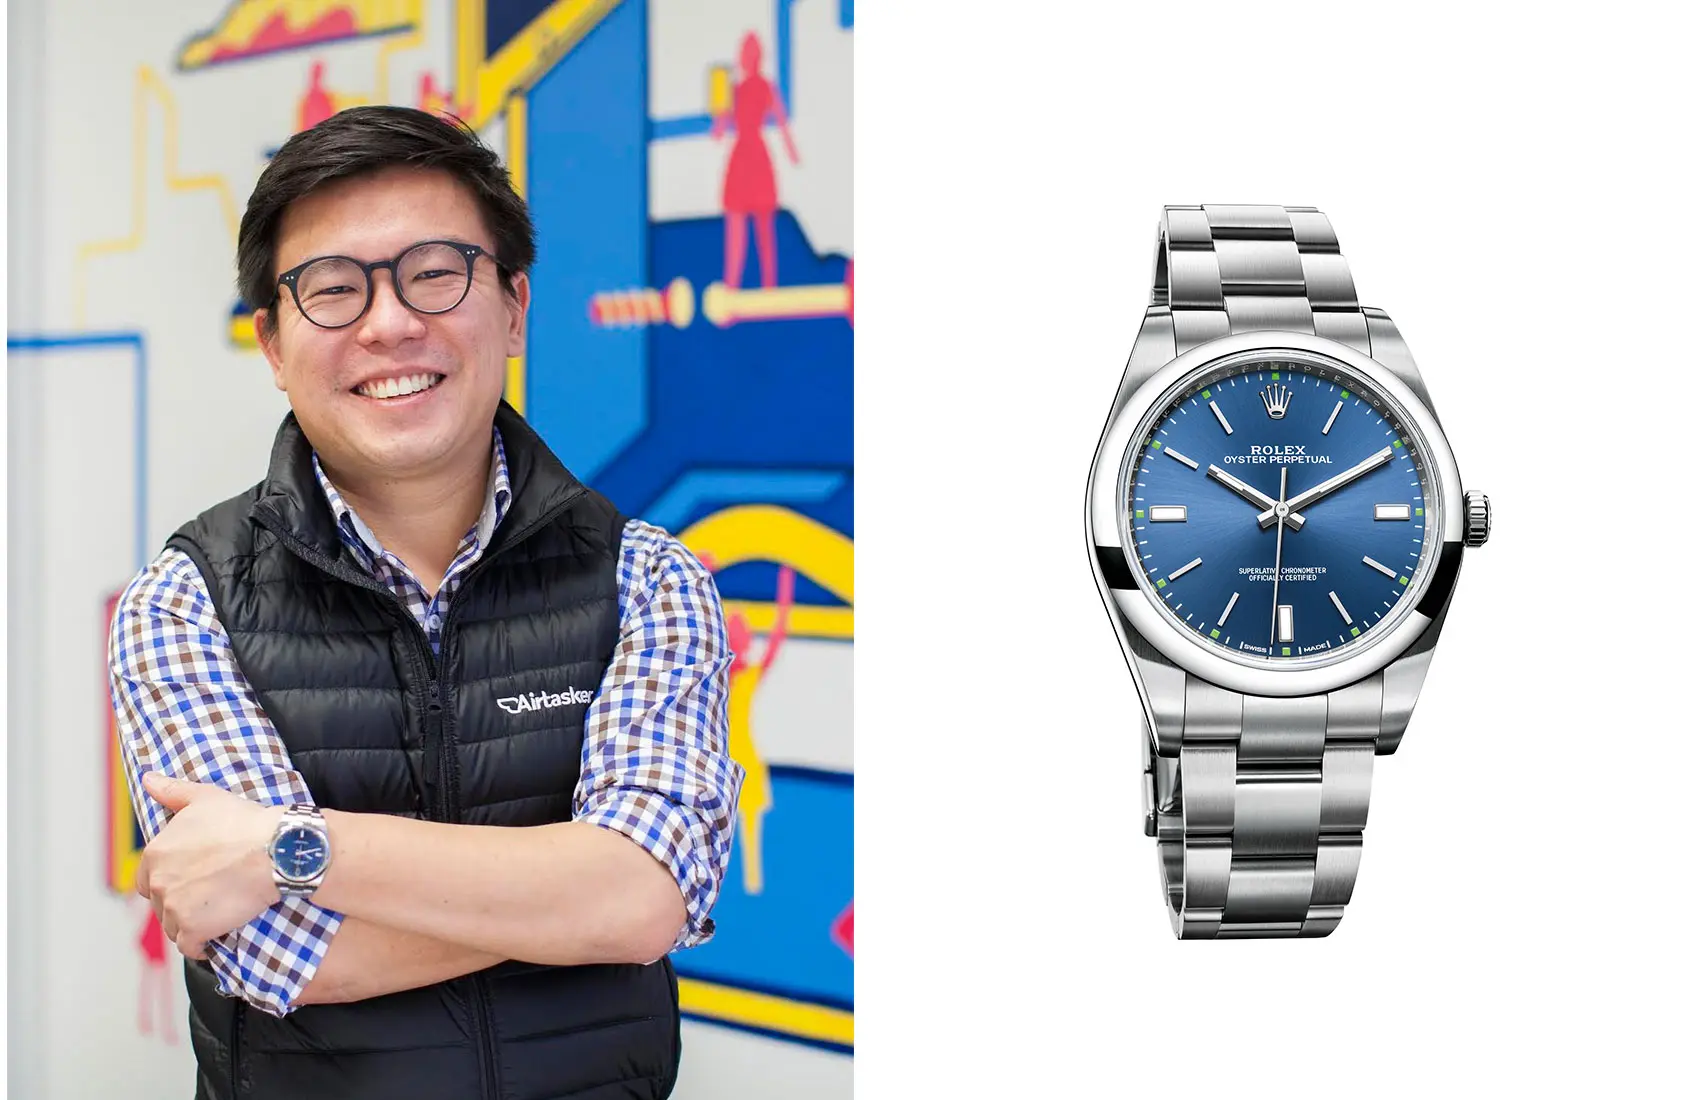 Six Australian Start-up Founders and Their Watches